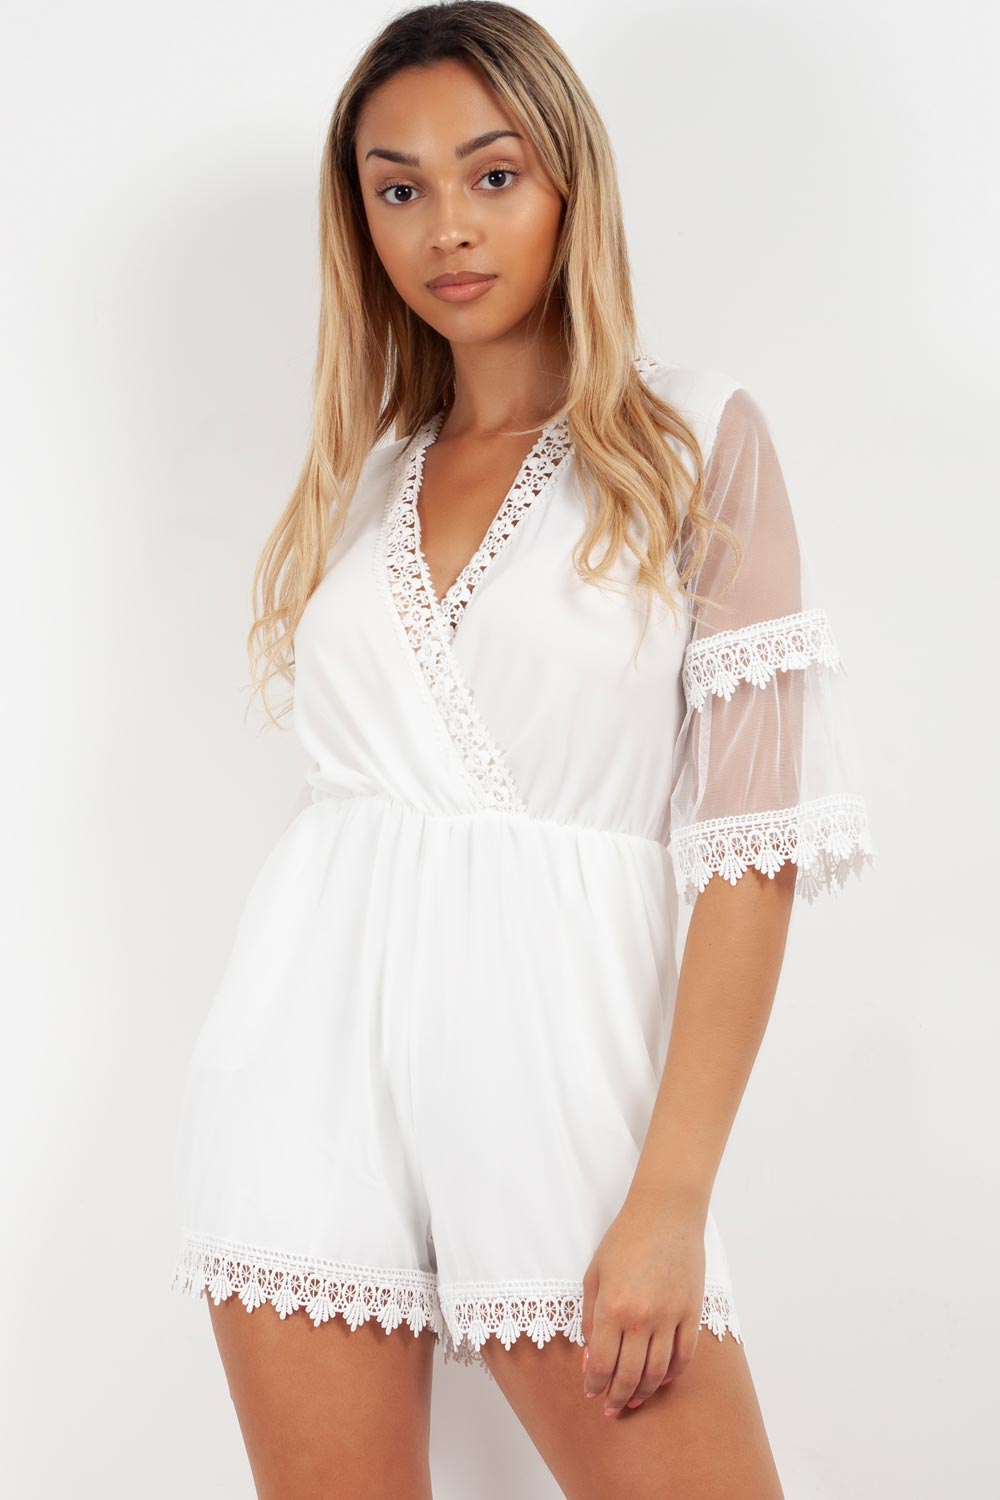 white playsuit outfit